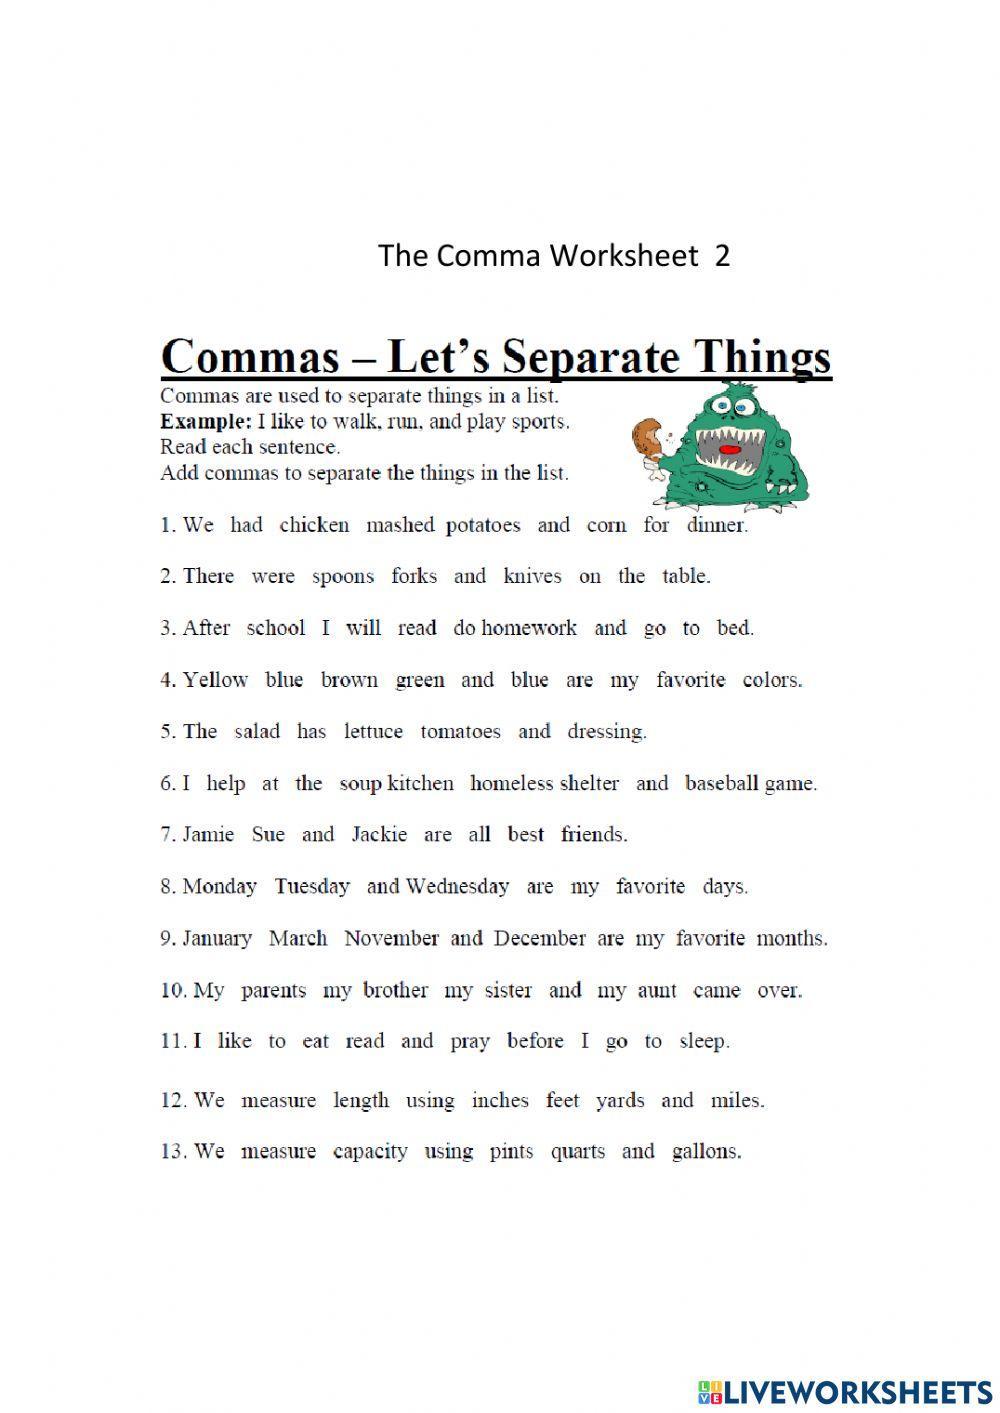 The Comma Worksheet 2